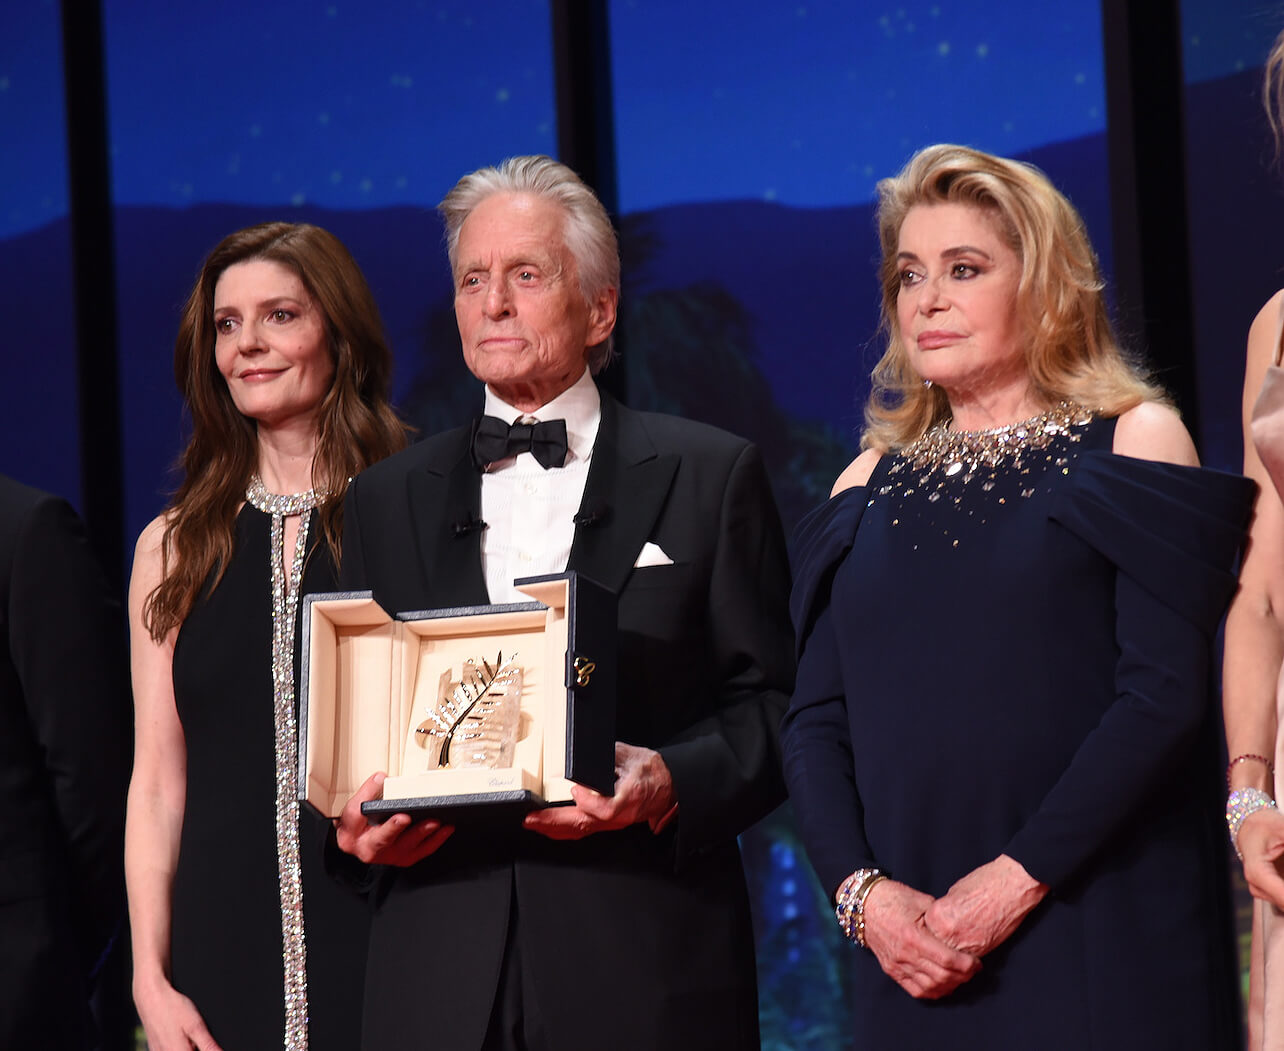 Michael Douglas and his honorary Palme d'or